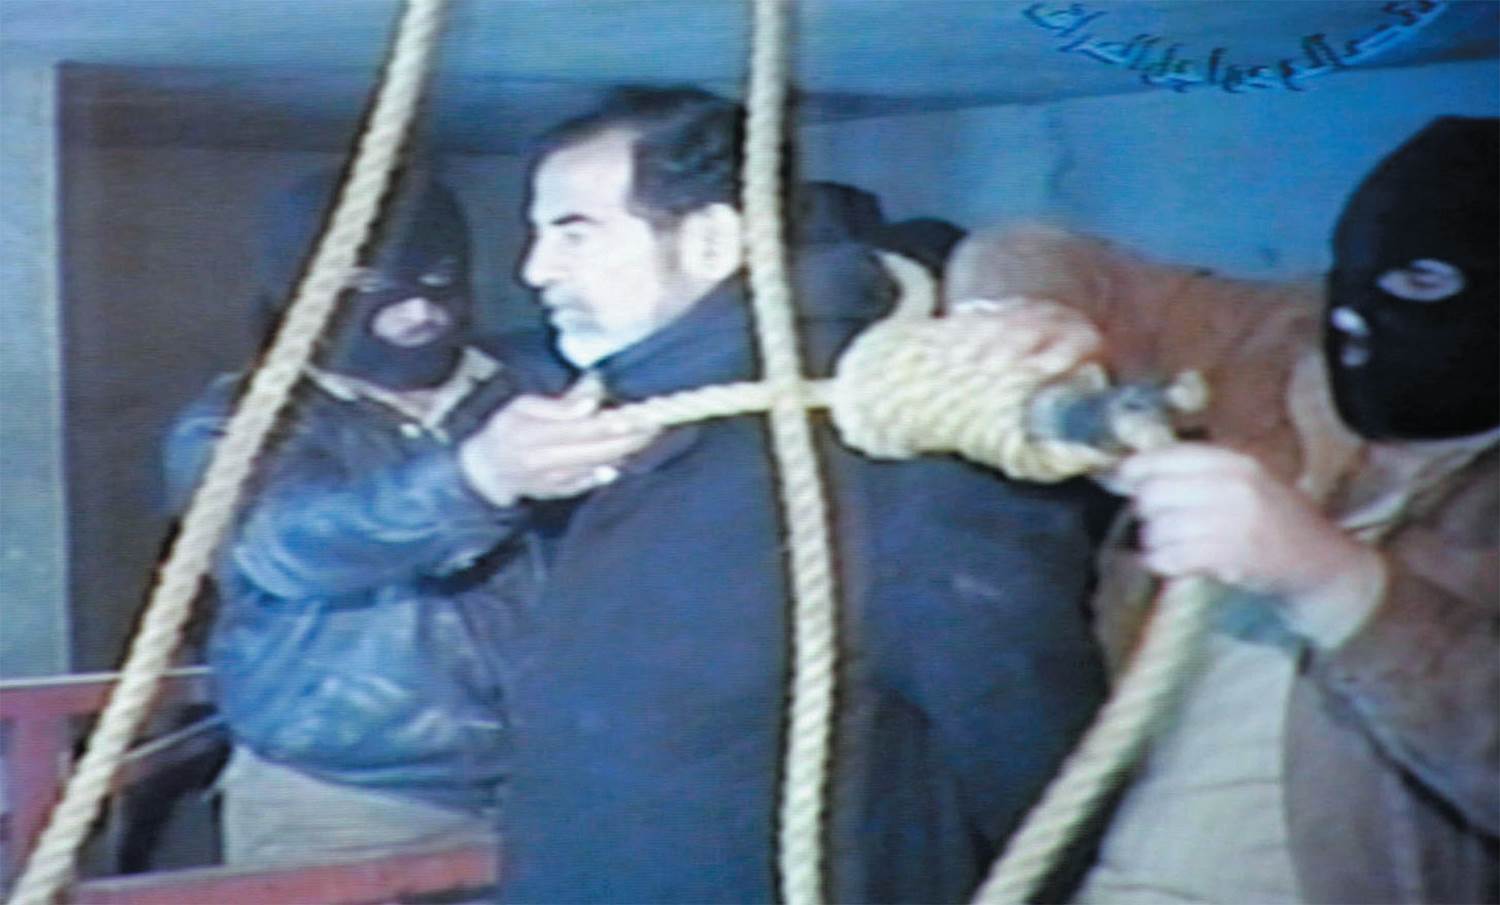 In 2006 an Iraqi tribunal convicted Saddam Hussein of murdering his own people and sentenced him to 